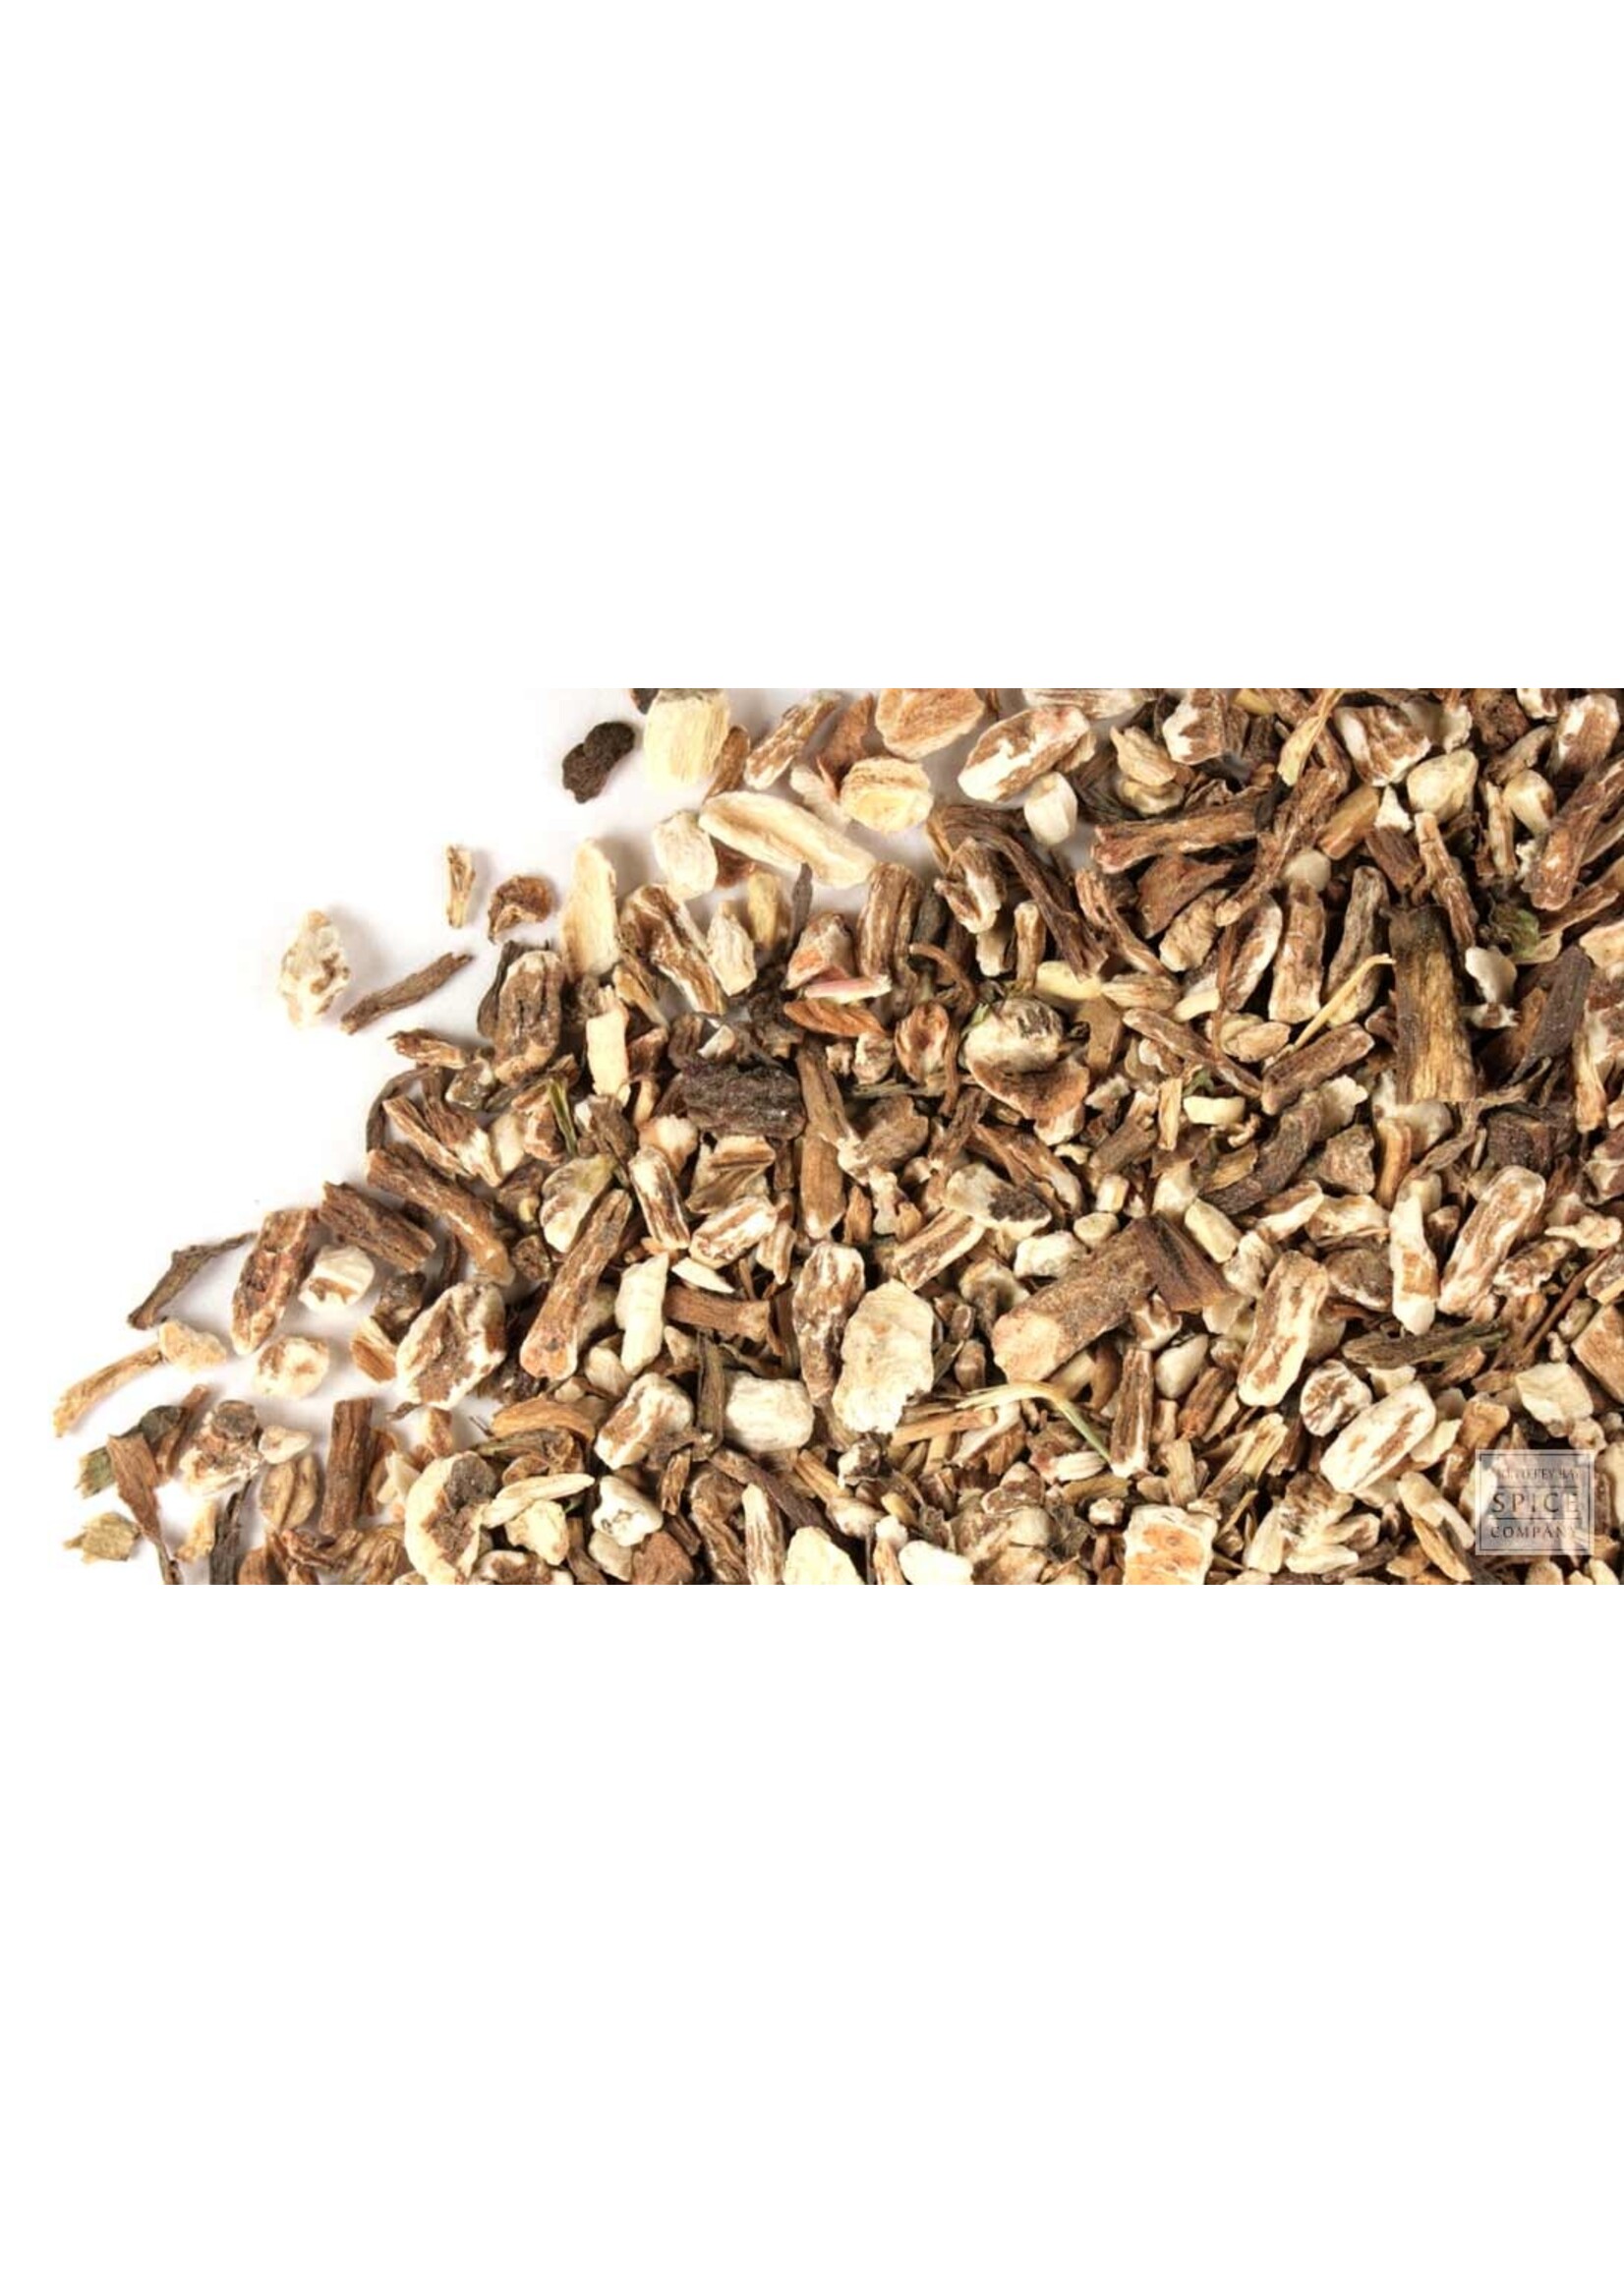 Wildharvested Dandelion Root - ounce